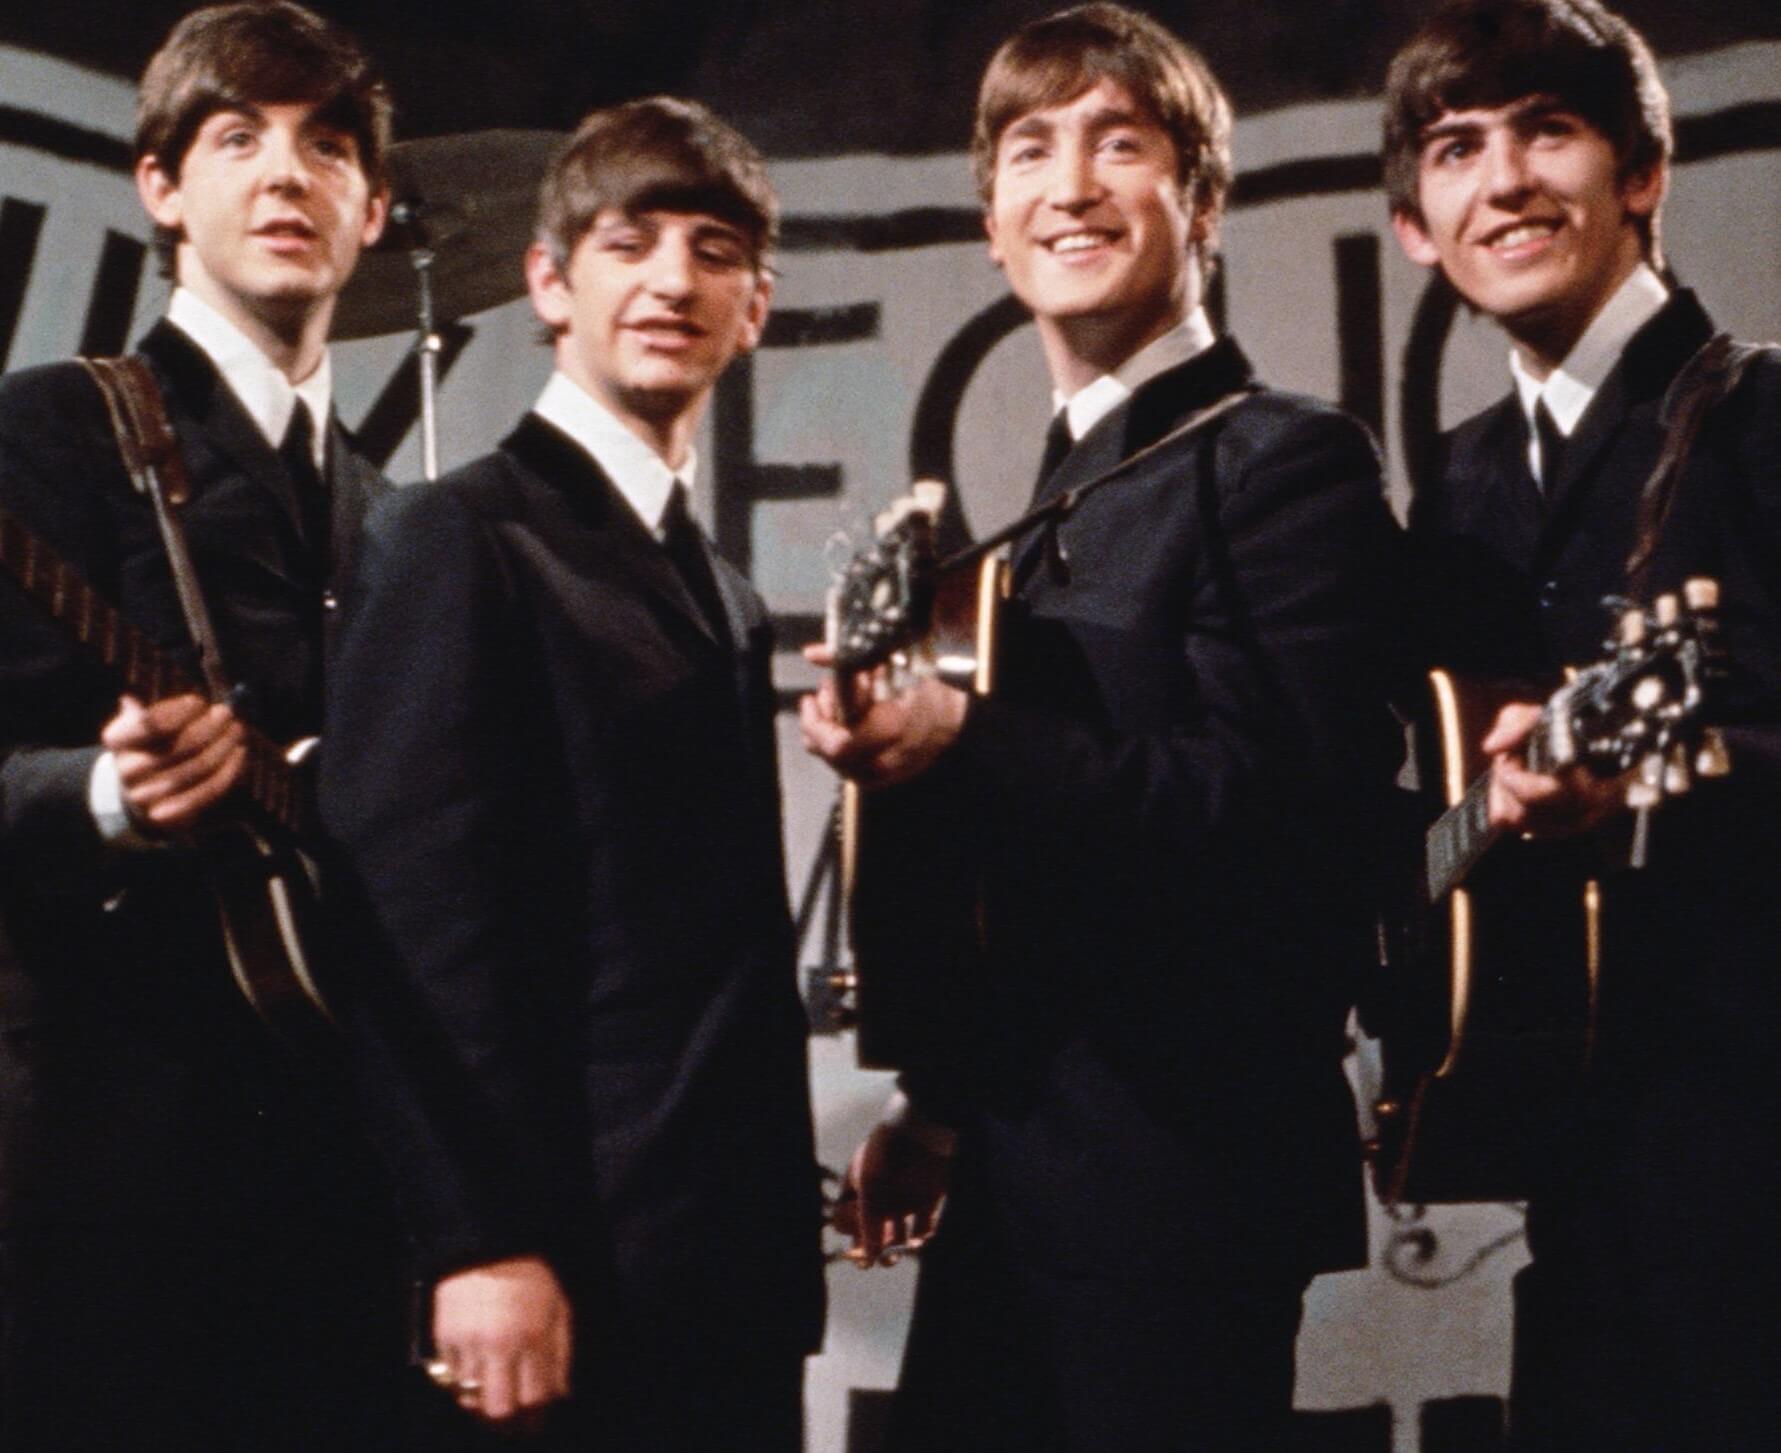 The Beatles wearing black suits